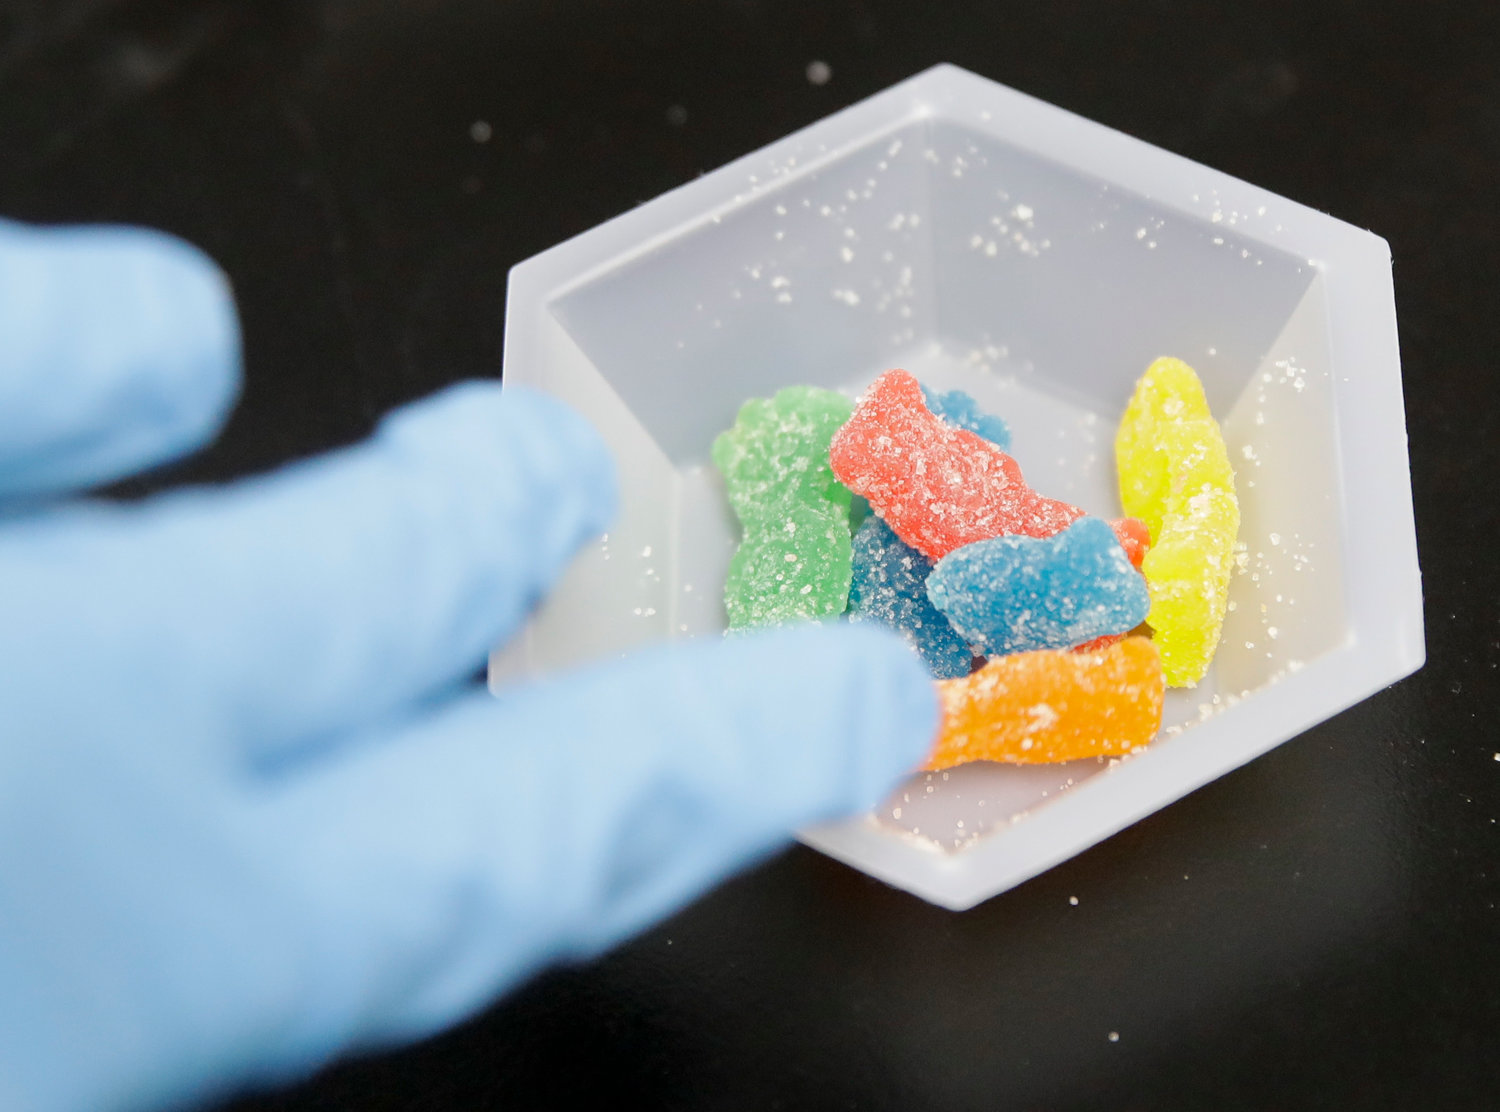 Edible marijuana samples are set aside for evaluation at a cannabis testing laboratory in this AP file photo. These new medicinal products can resemble candy and parents are encouraged to warn their children about them.